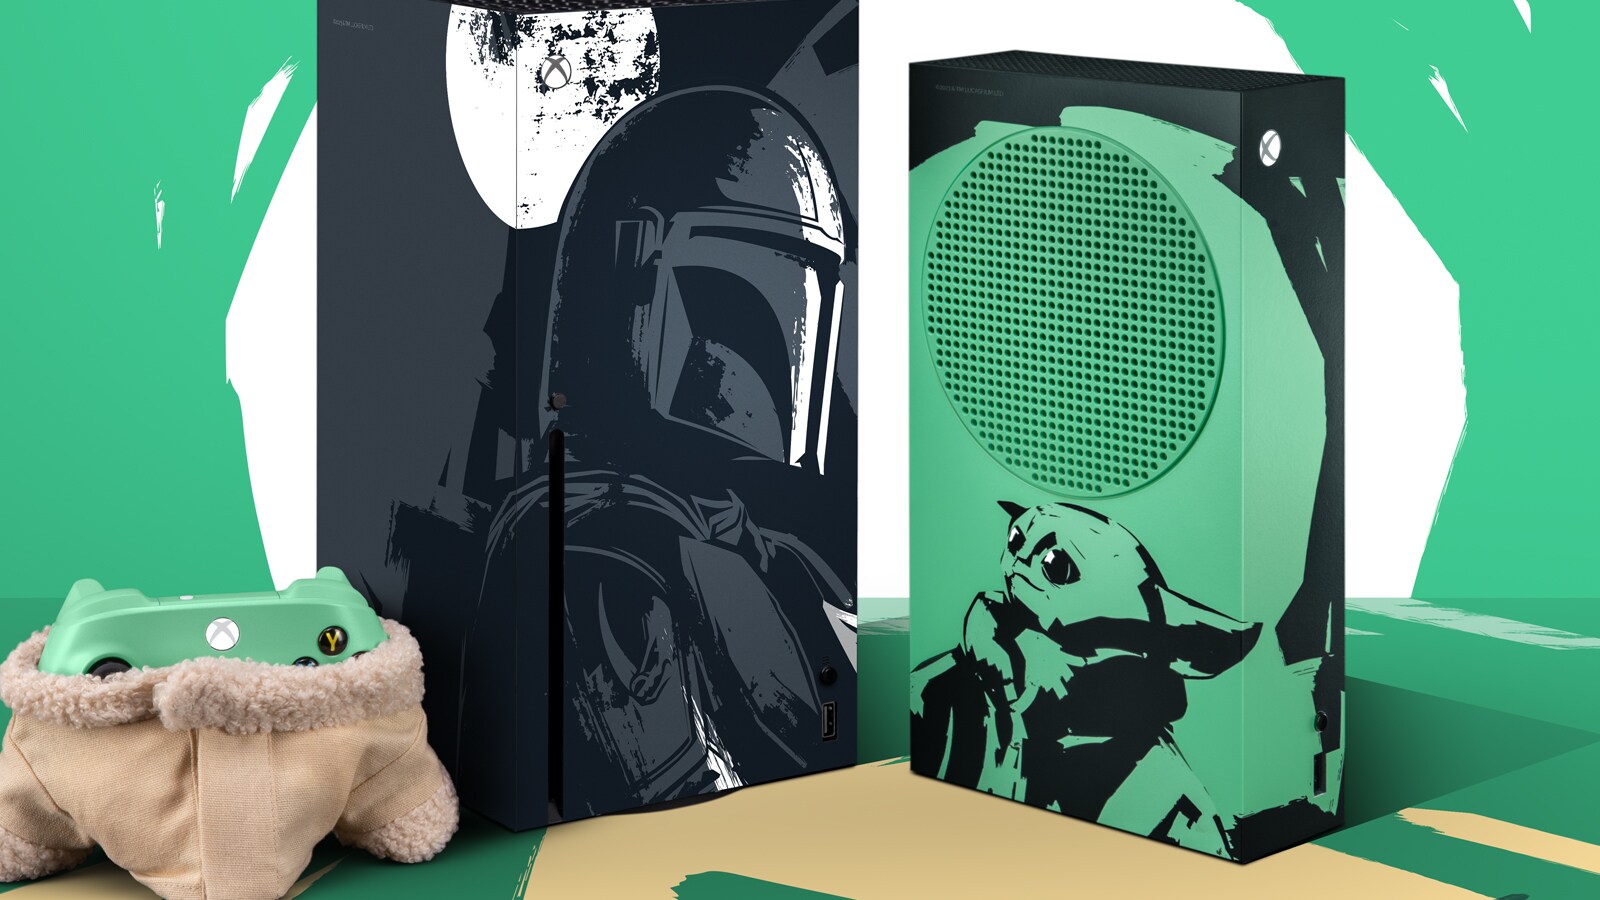 Xbox and Star Wars Join Forces with The Mandalorian-Themed Bundle